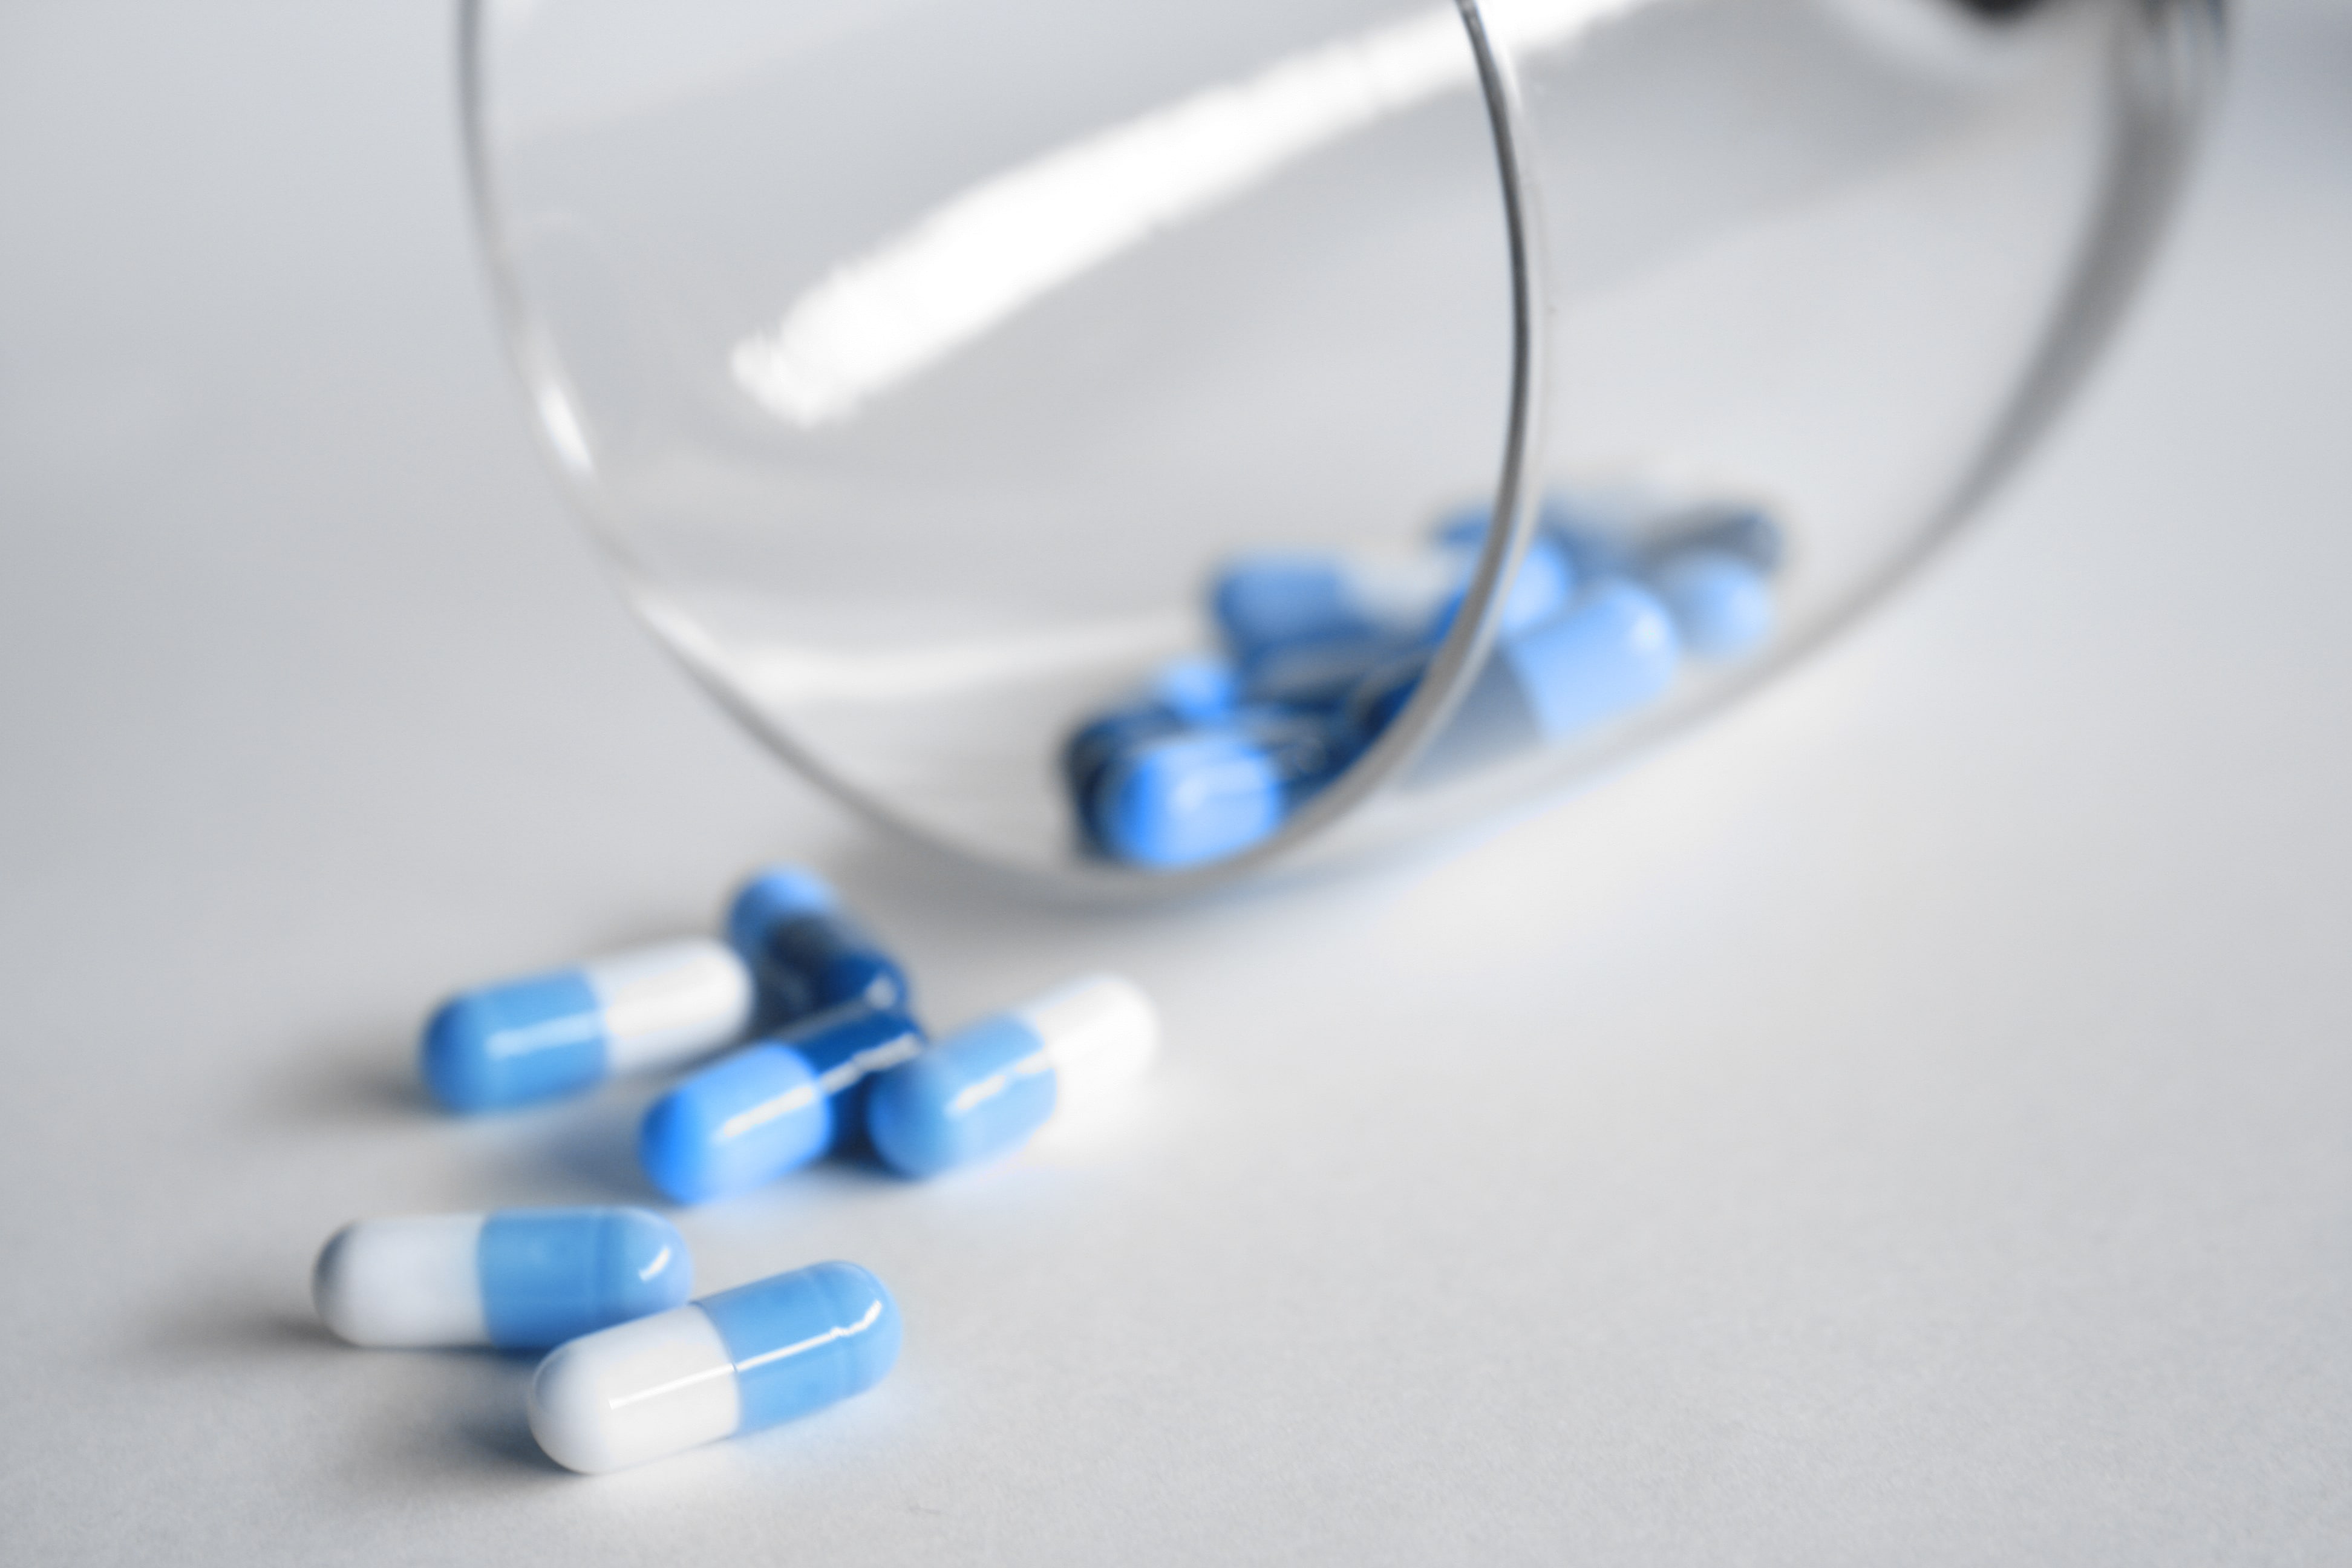 White and blue painkiller capsules